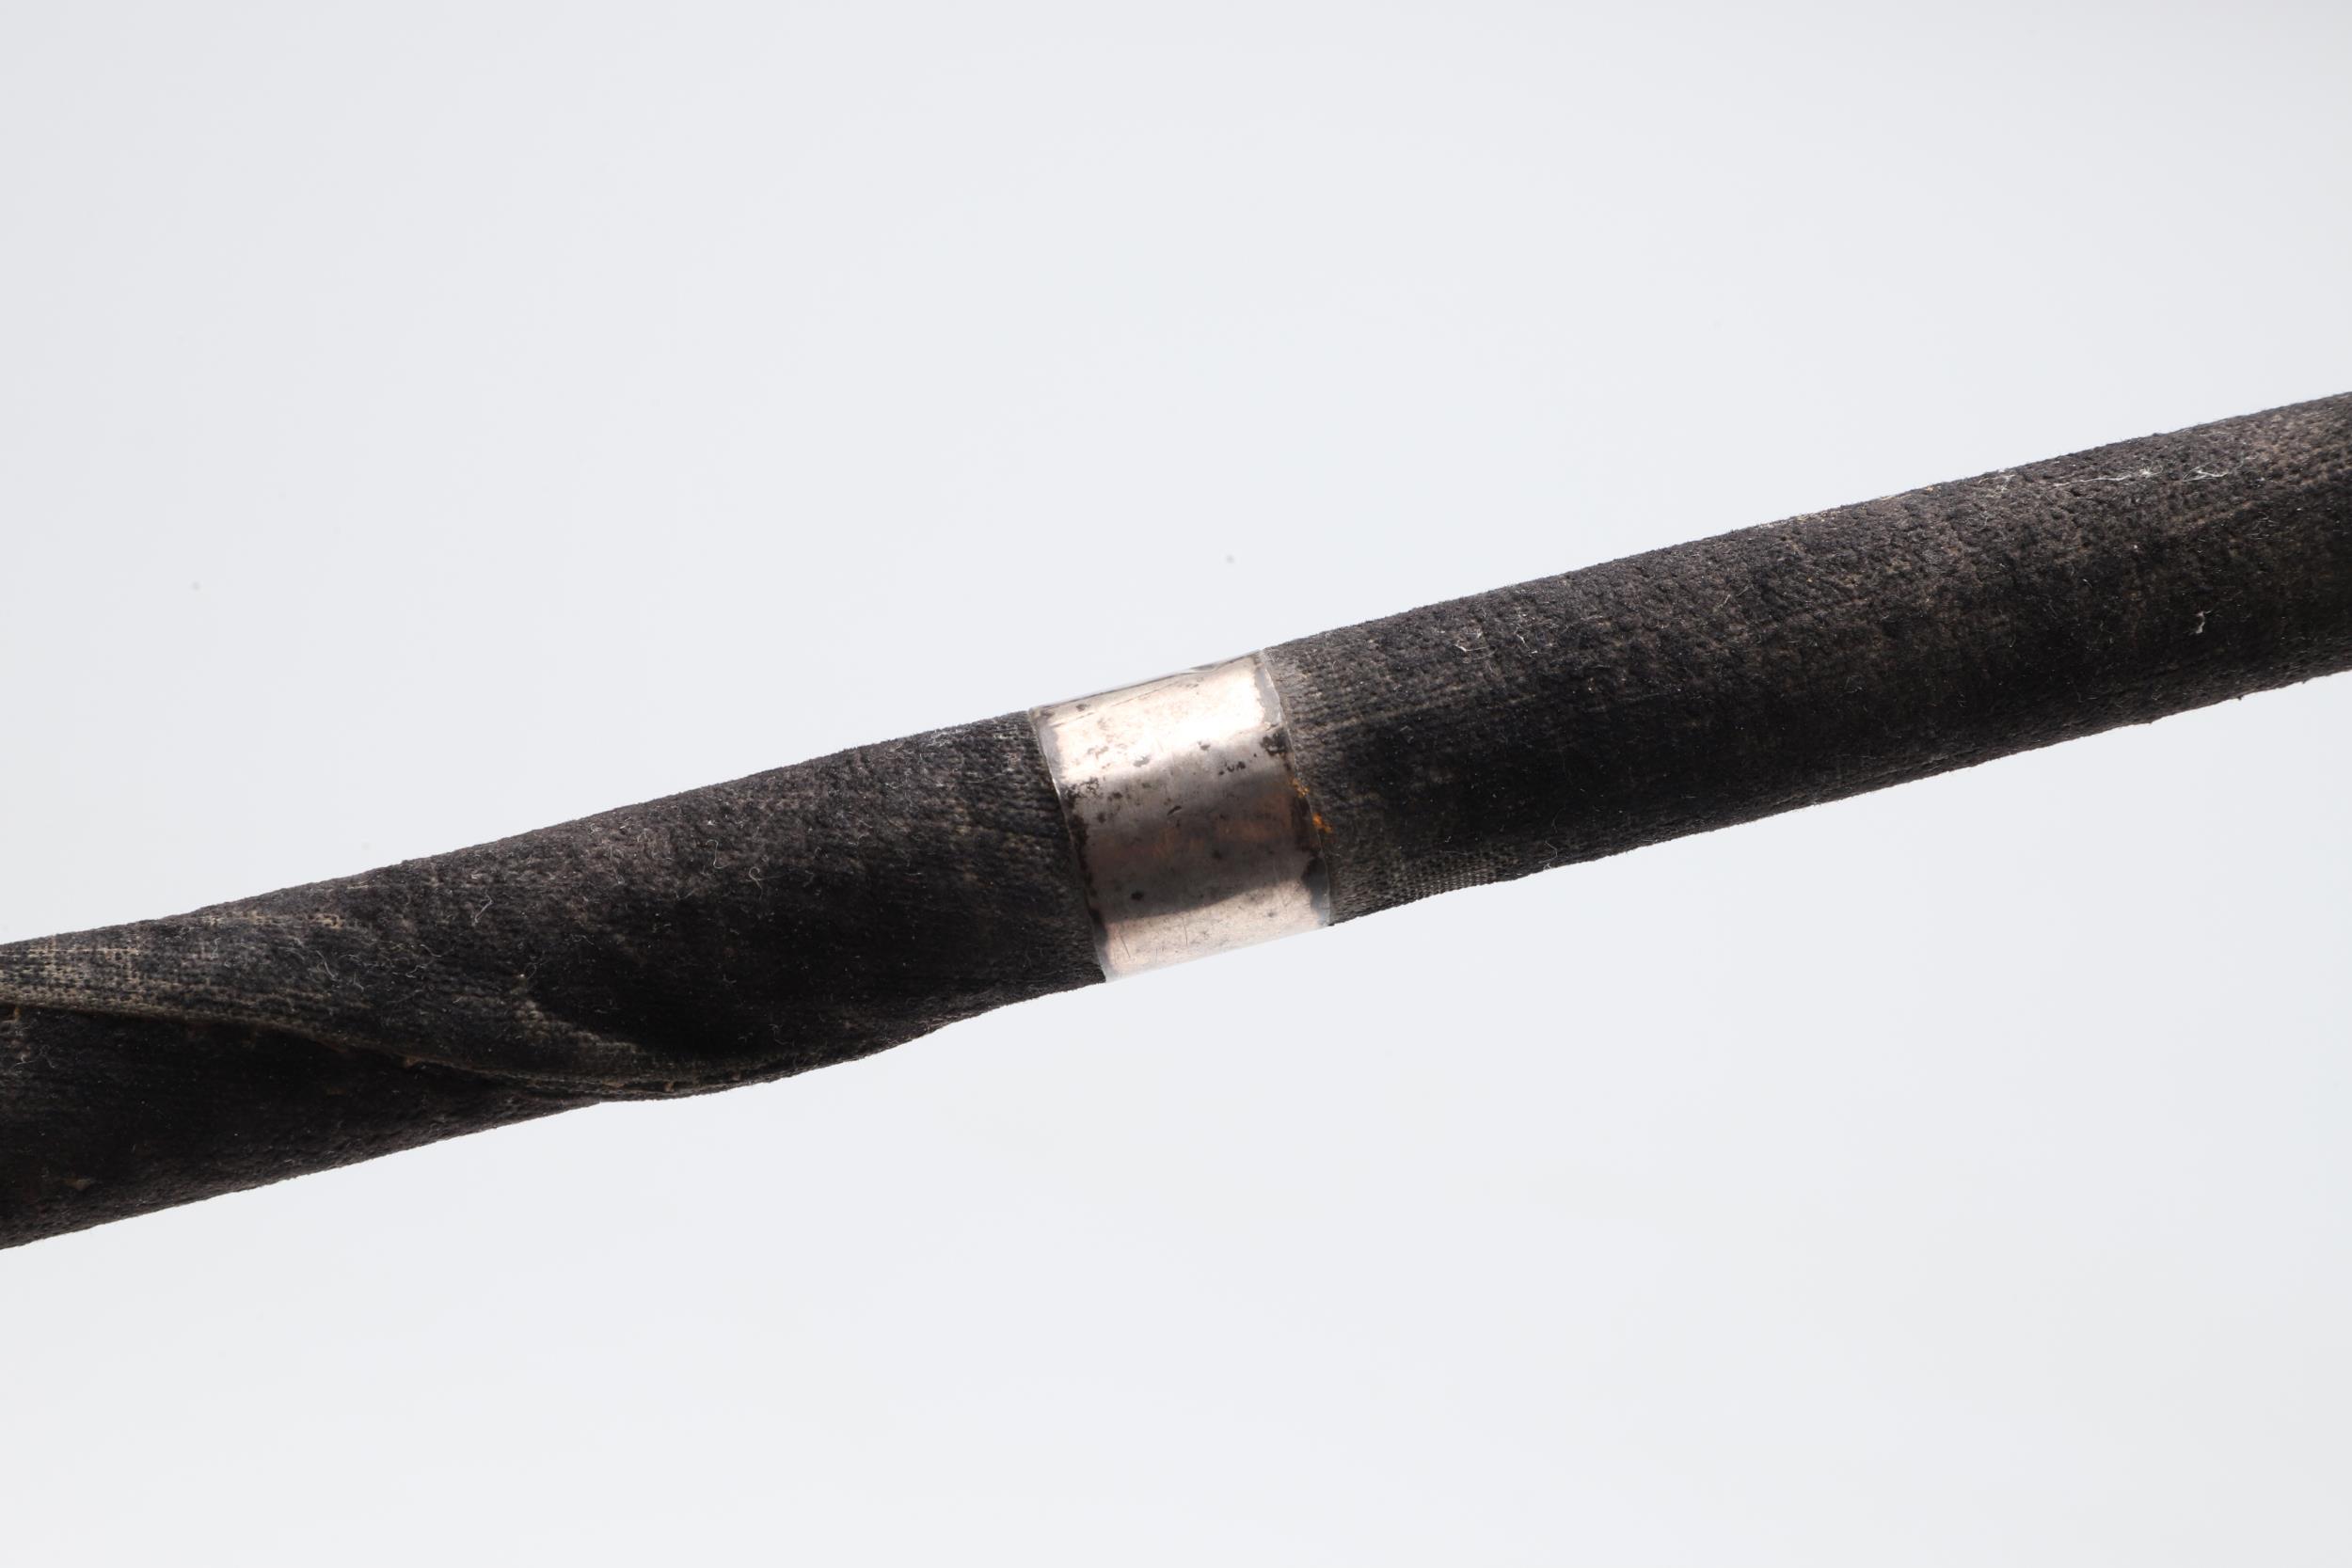 A VERY UNUSUAL SILVER MOUNTED TURKISH PUSIKAN OR GENERAL'S BATON. - Image 10 of 12